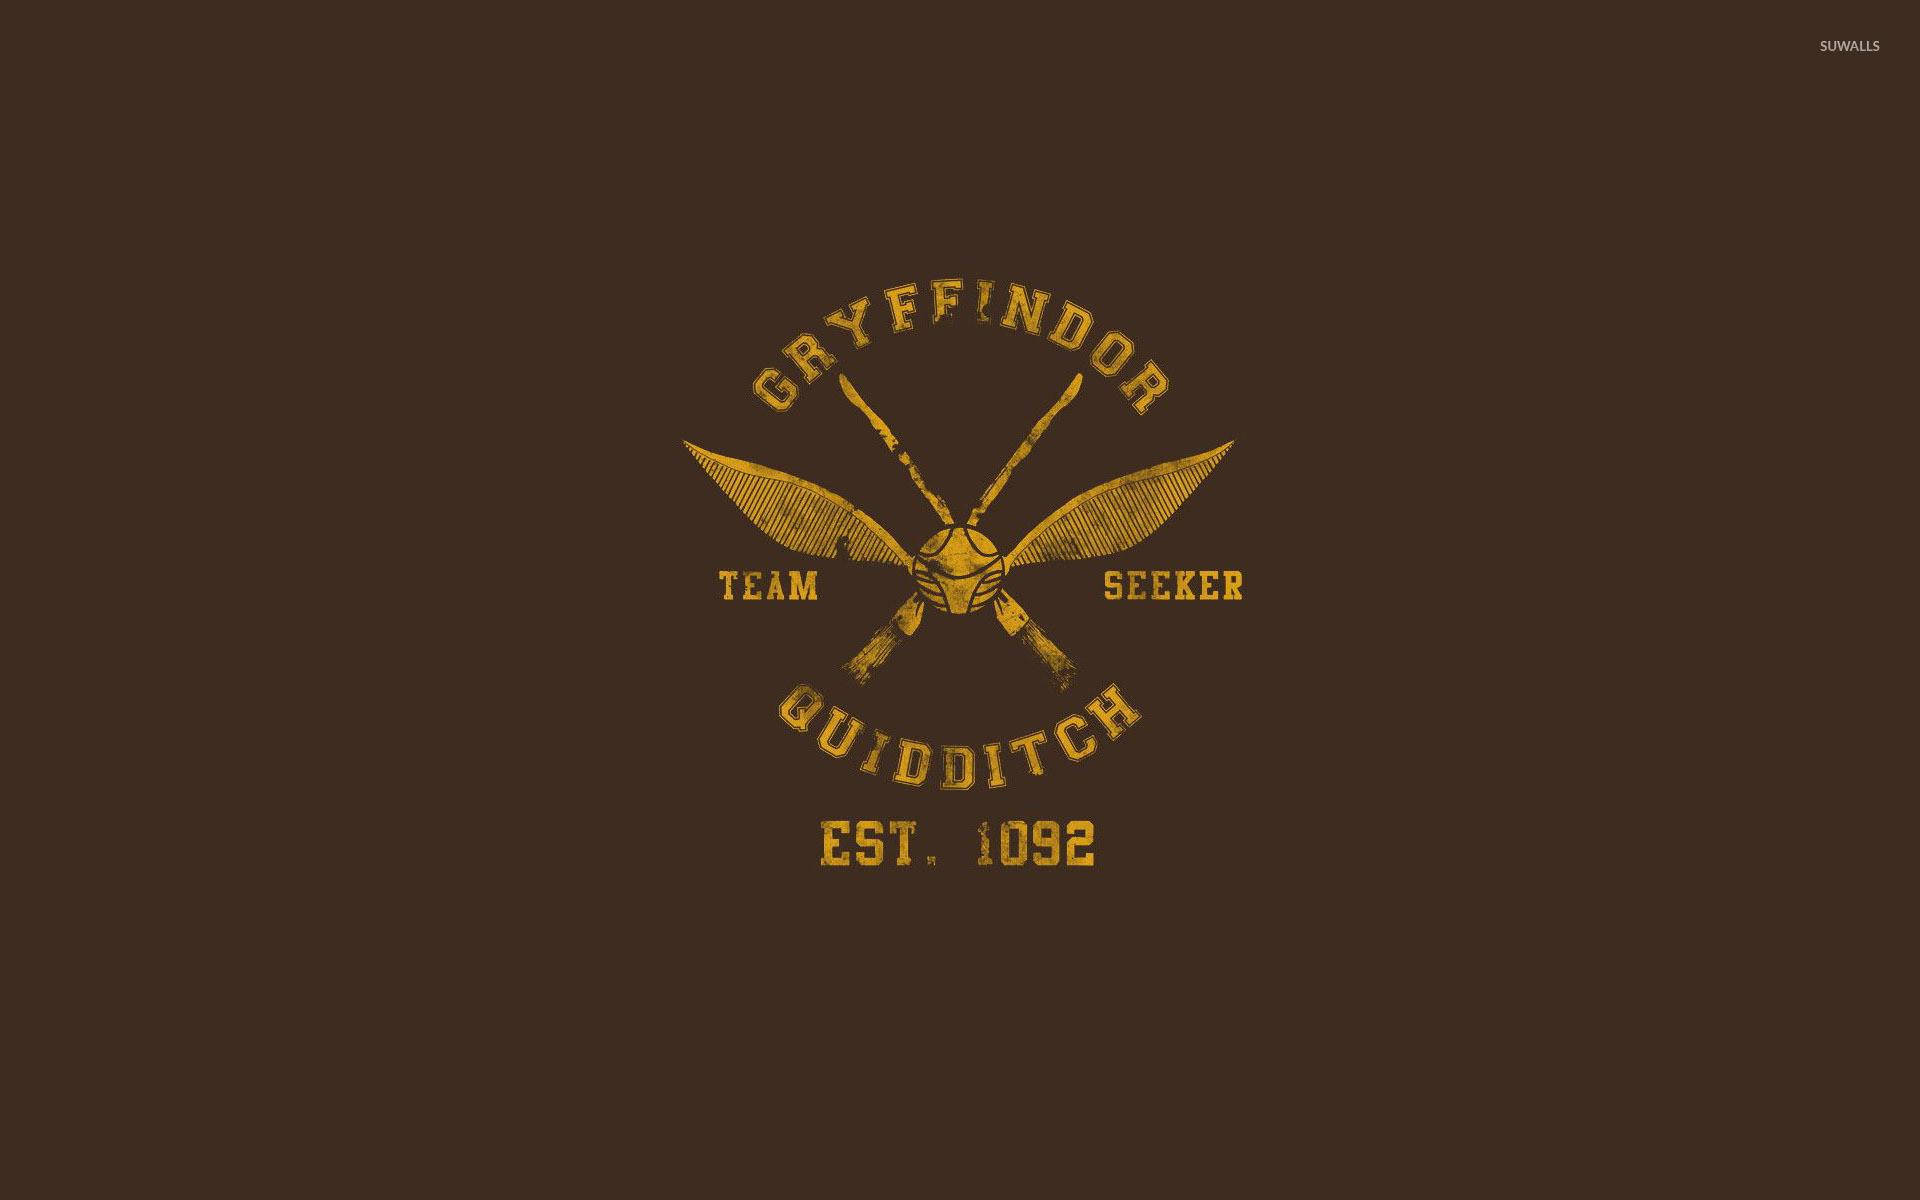 Aesthetic Harry Potter Gryffindor Quidditch Wallpaper